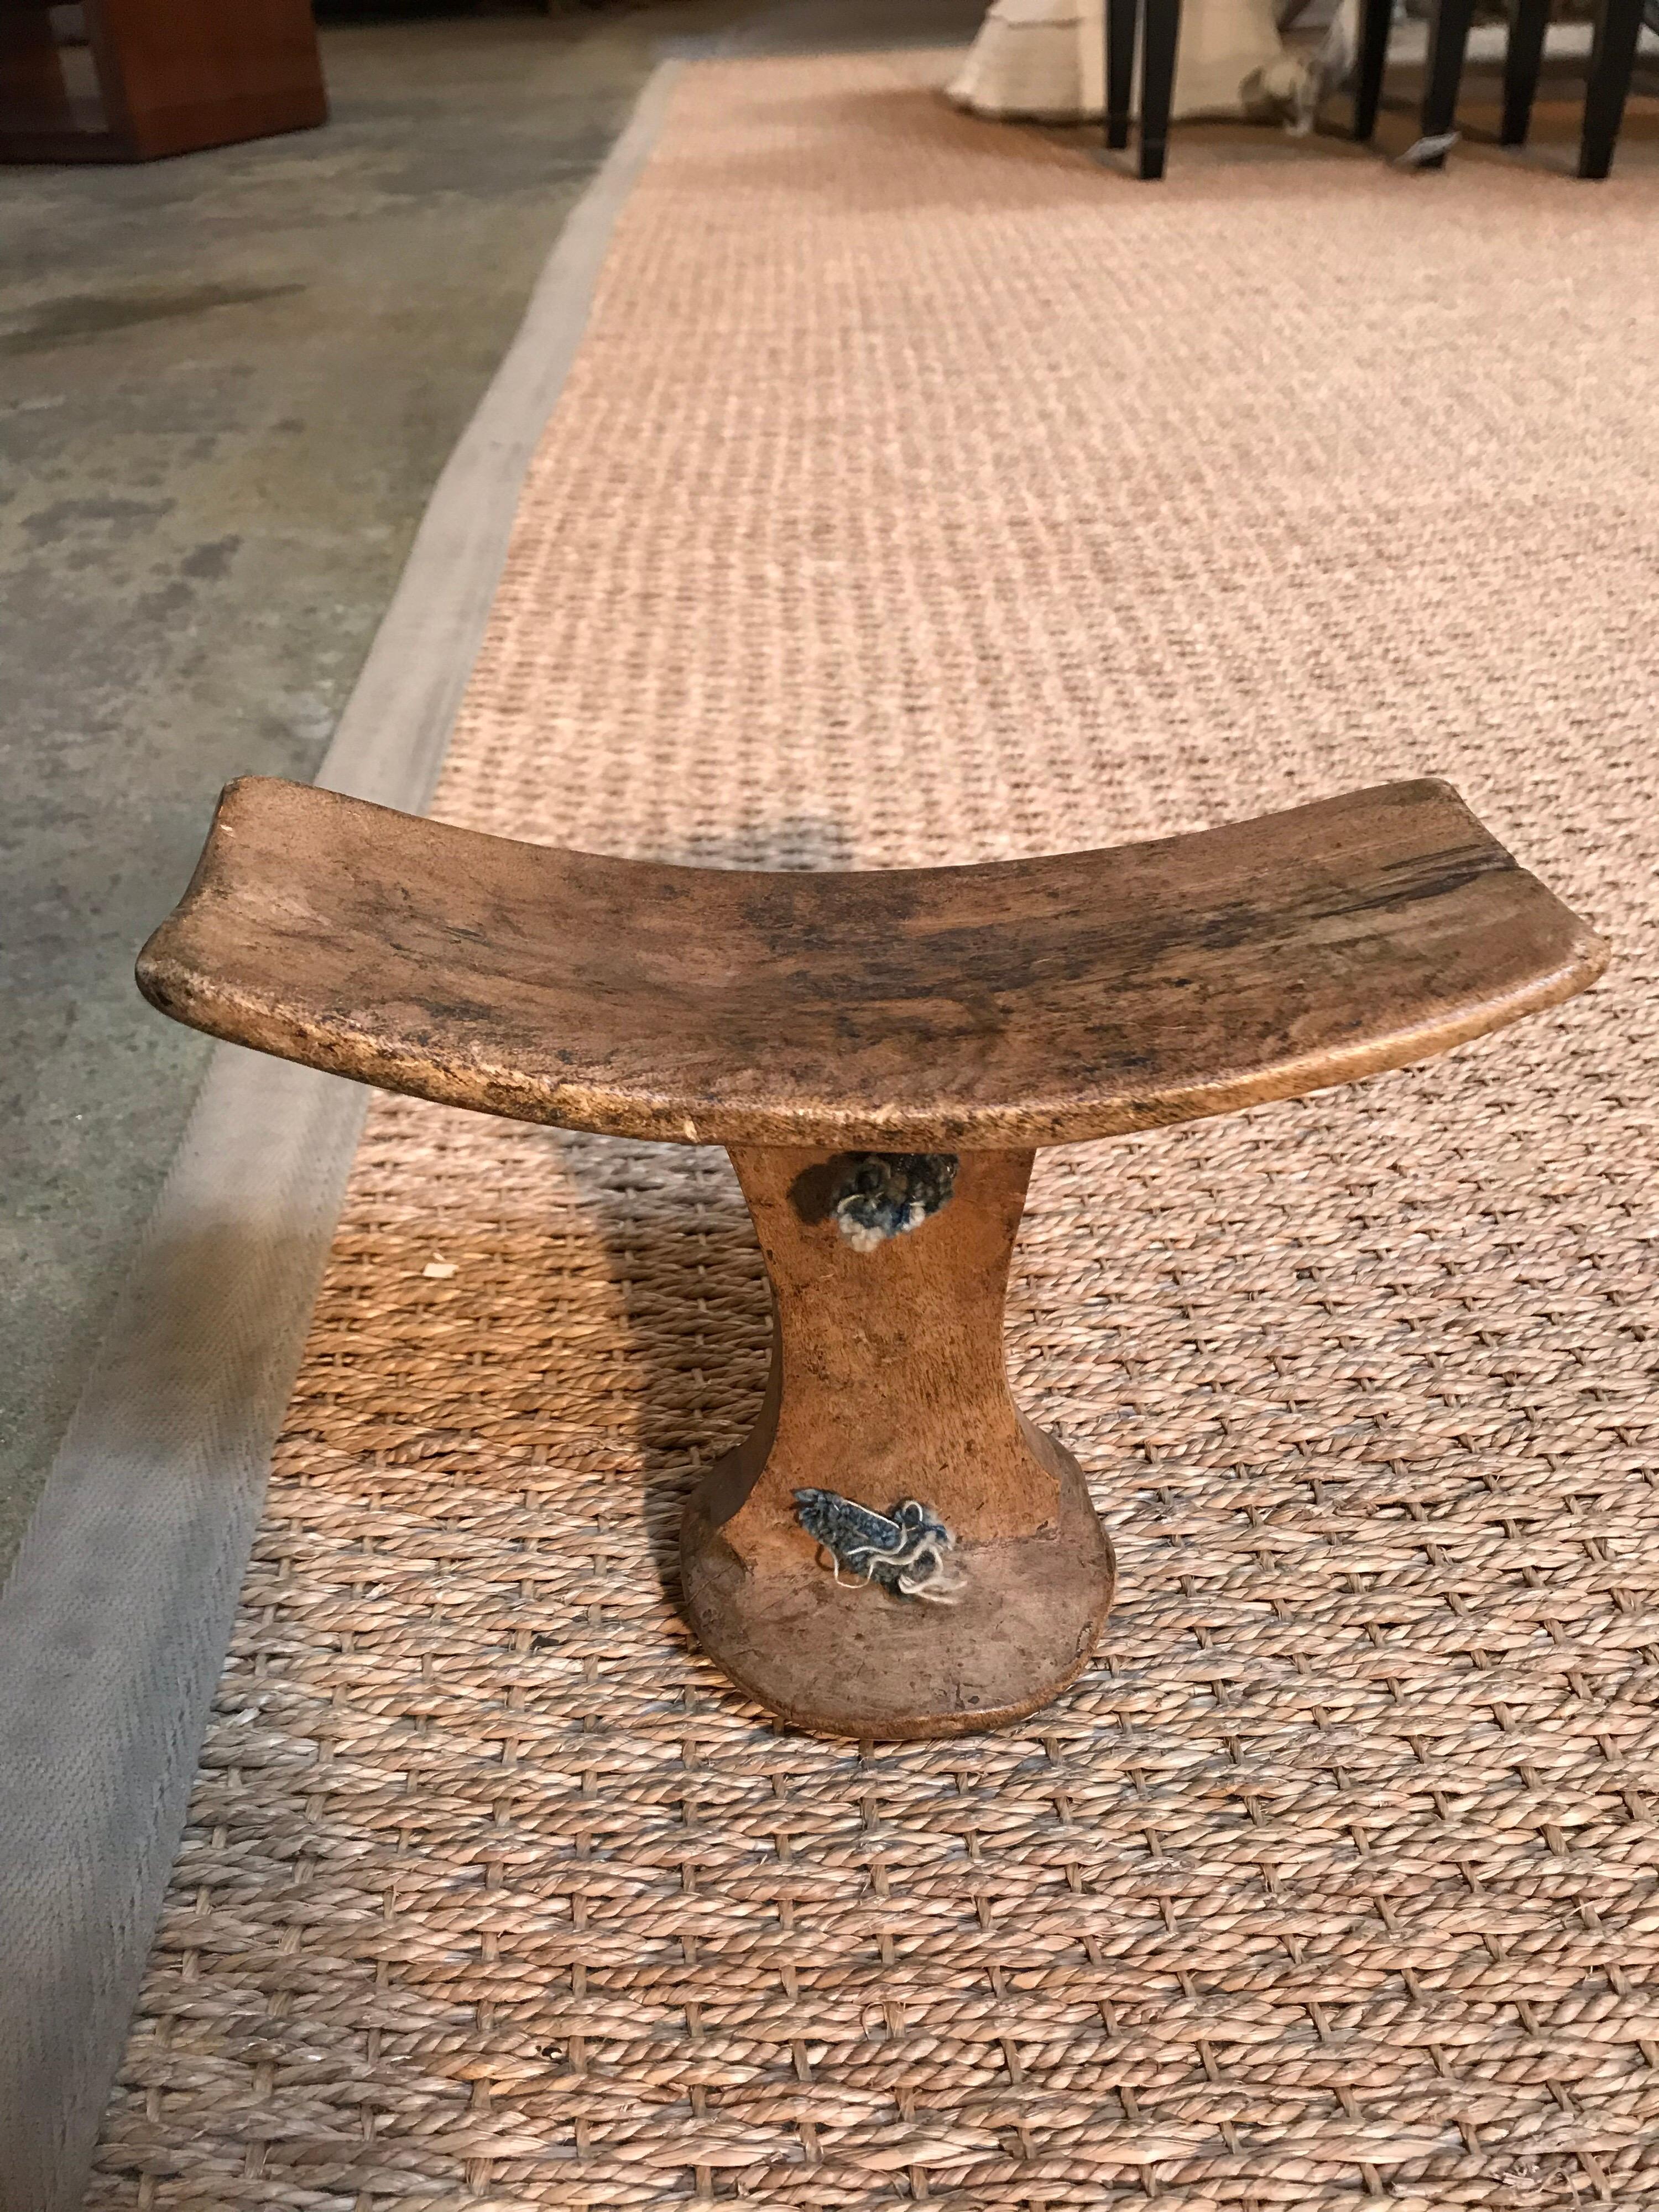 This 19th century African head rest is hand carved with rope handles.